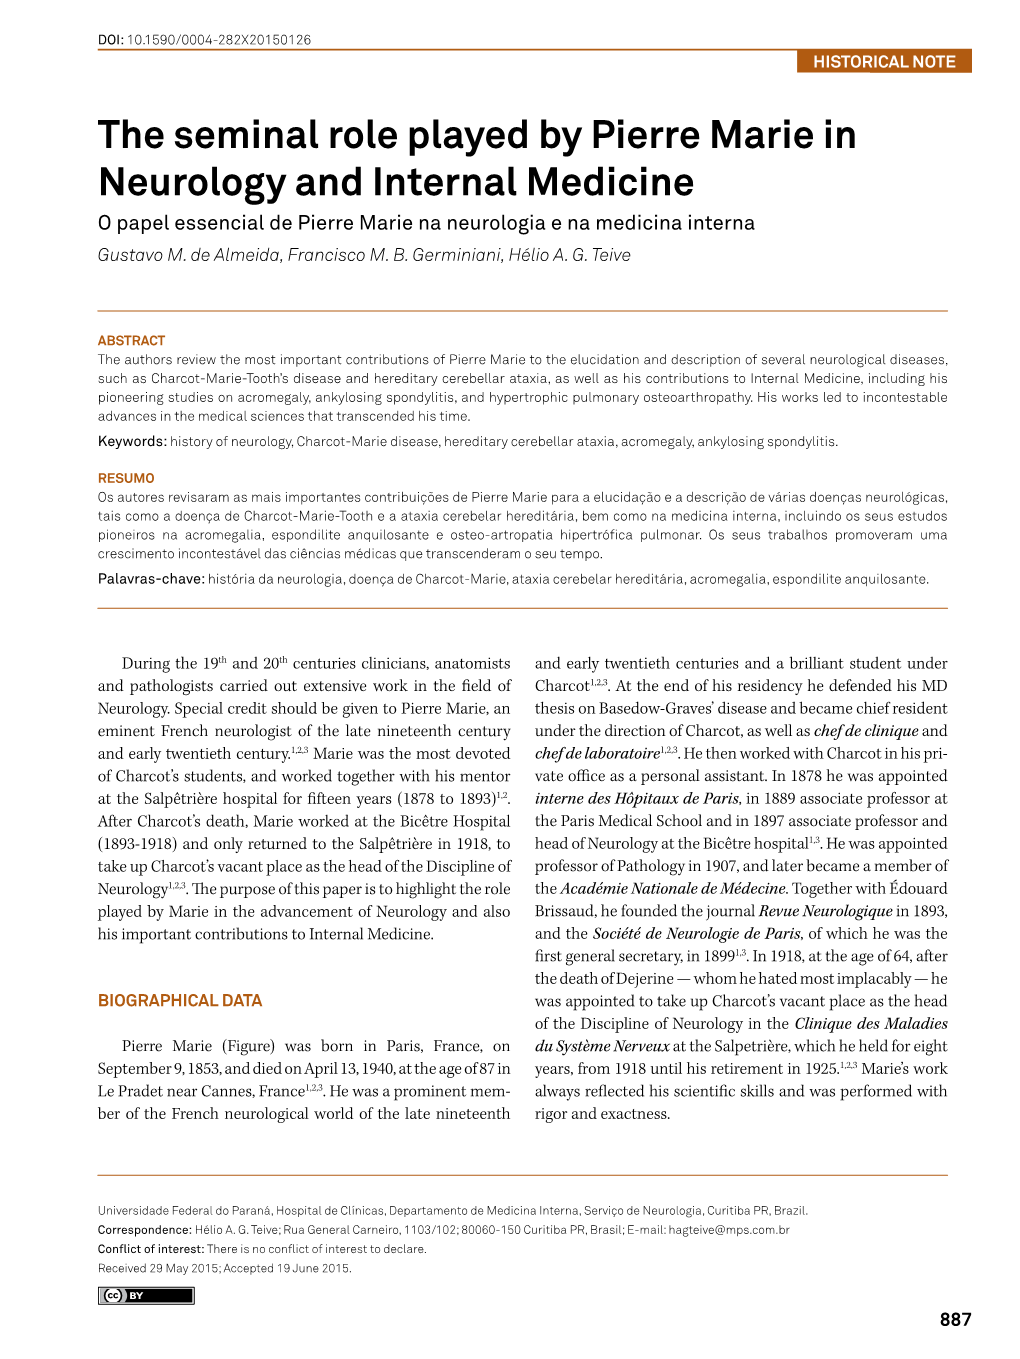 The Seminal Role Played by Pierre Marie in Neurology and Internal Medicine O Papel Essencial De Pierre Marie Na Neurologia E Na Medicina Interna Gustavo M